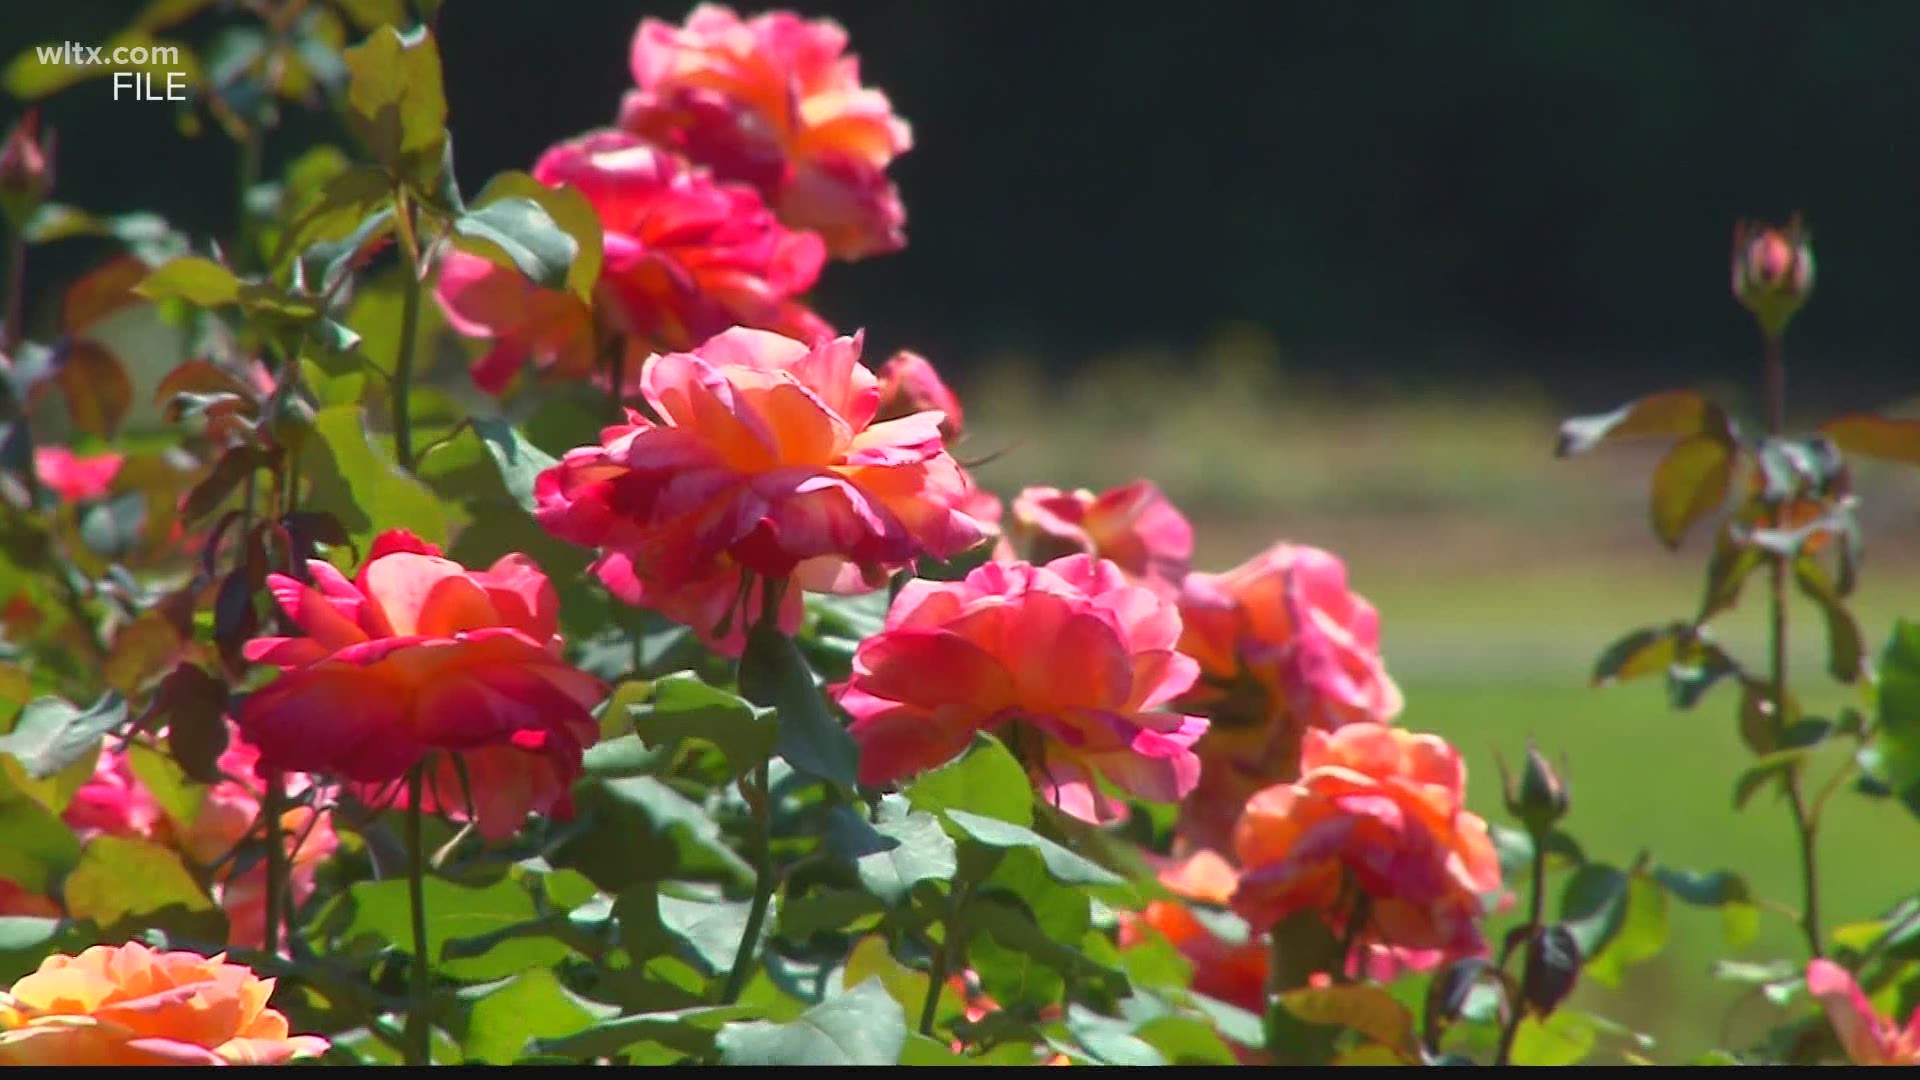 The decision on the Festival of Roses is expected during Tuesday's regular city council meeting.